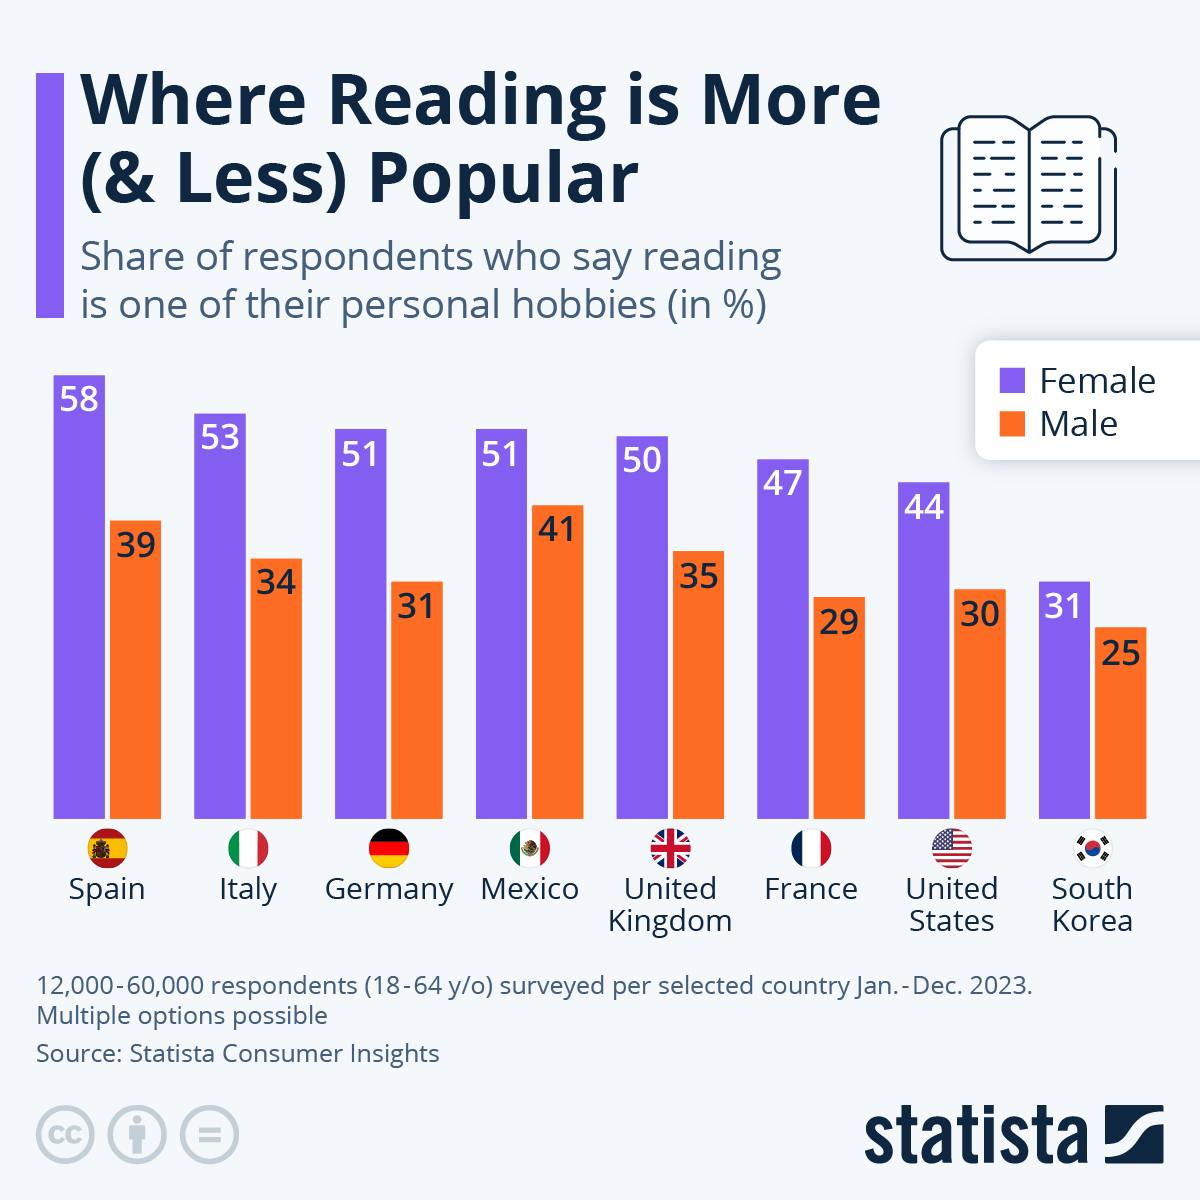 Infographic: Where reading is most (and least) popular

This graph shows the percentage of respondents who say reading is one of their personal hobbies (in %).